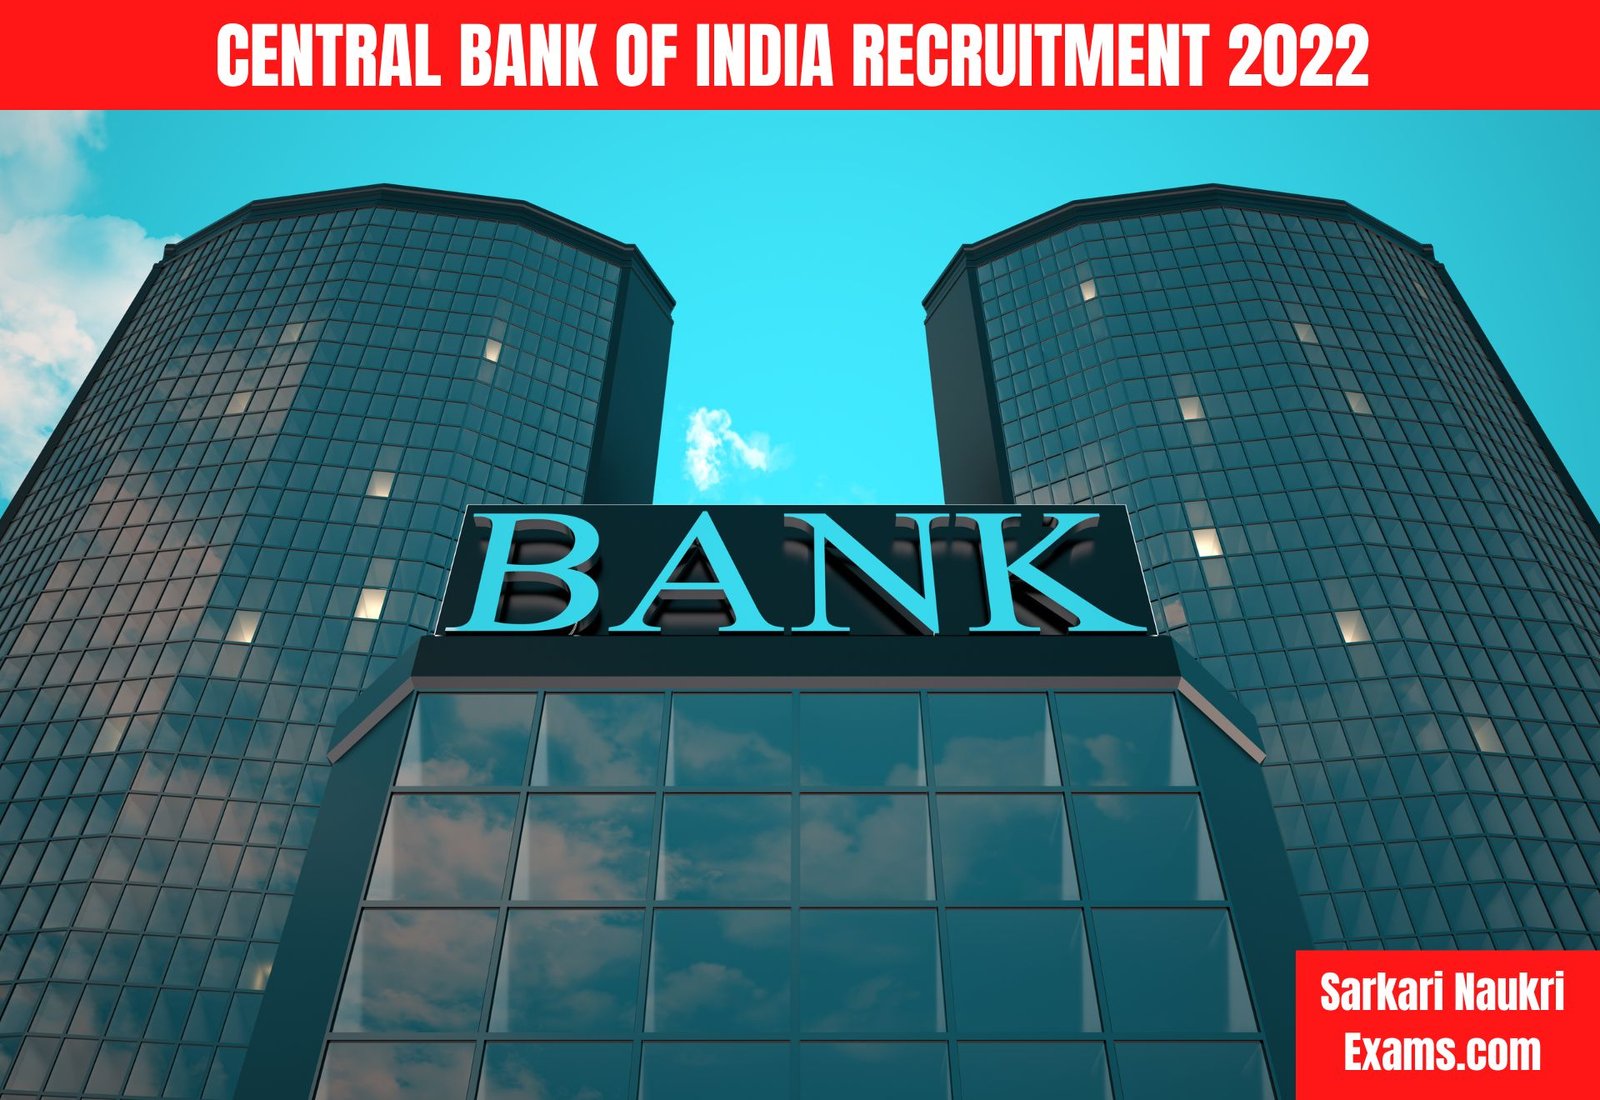 Central Bank of India Recruitment 2022 | Banking Job | Interview Based Job